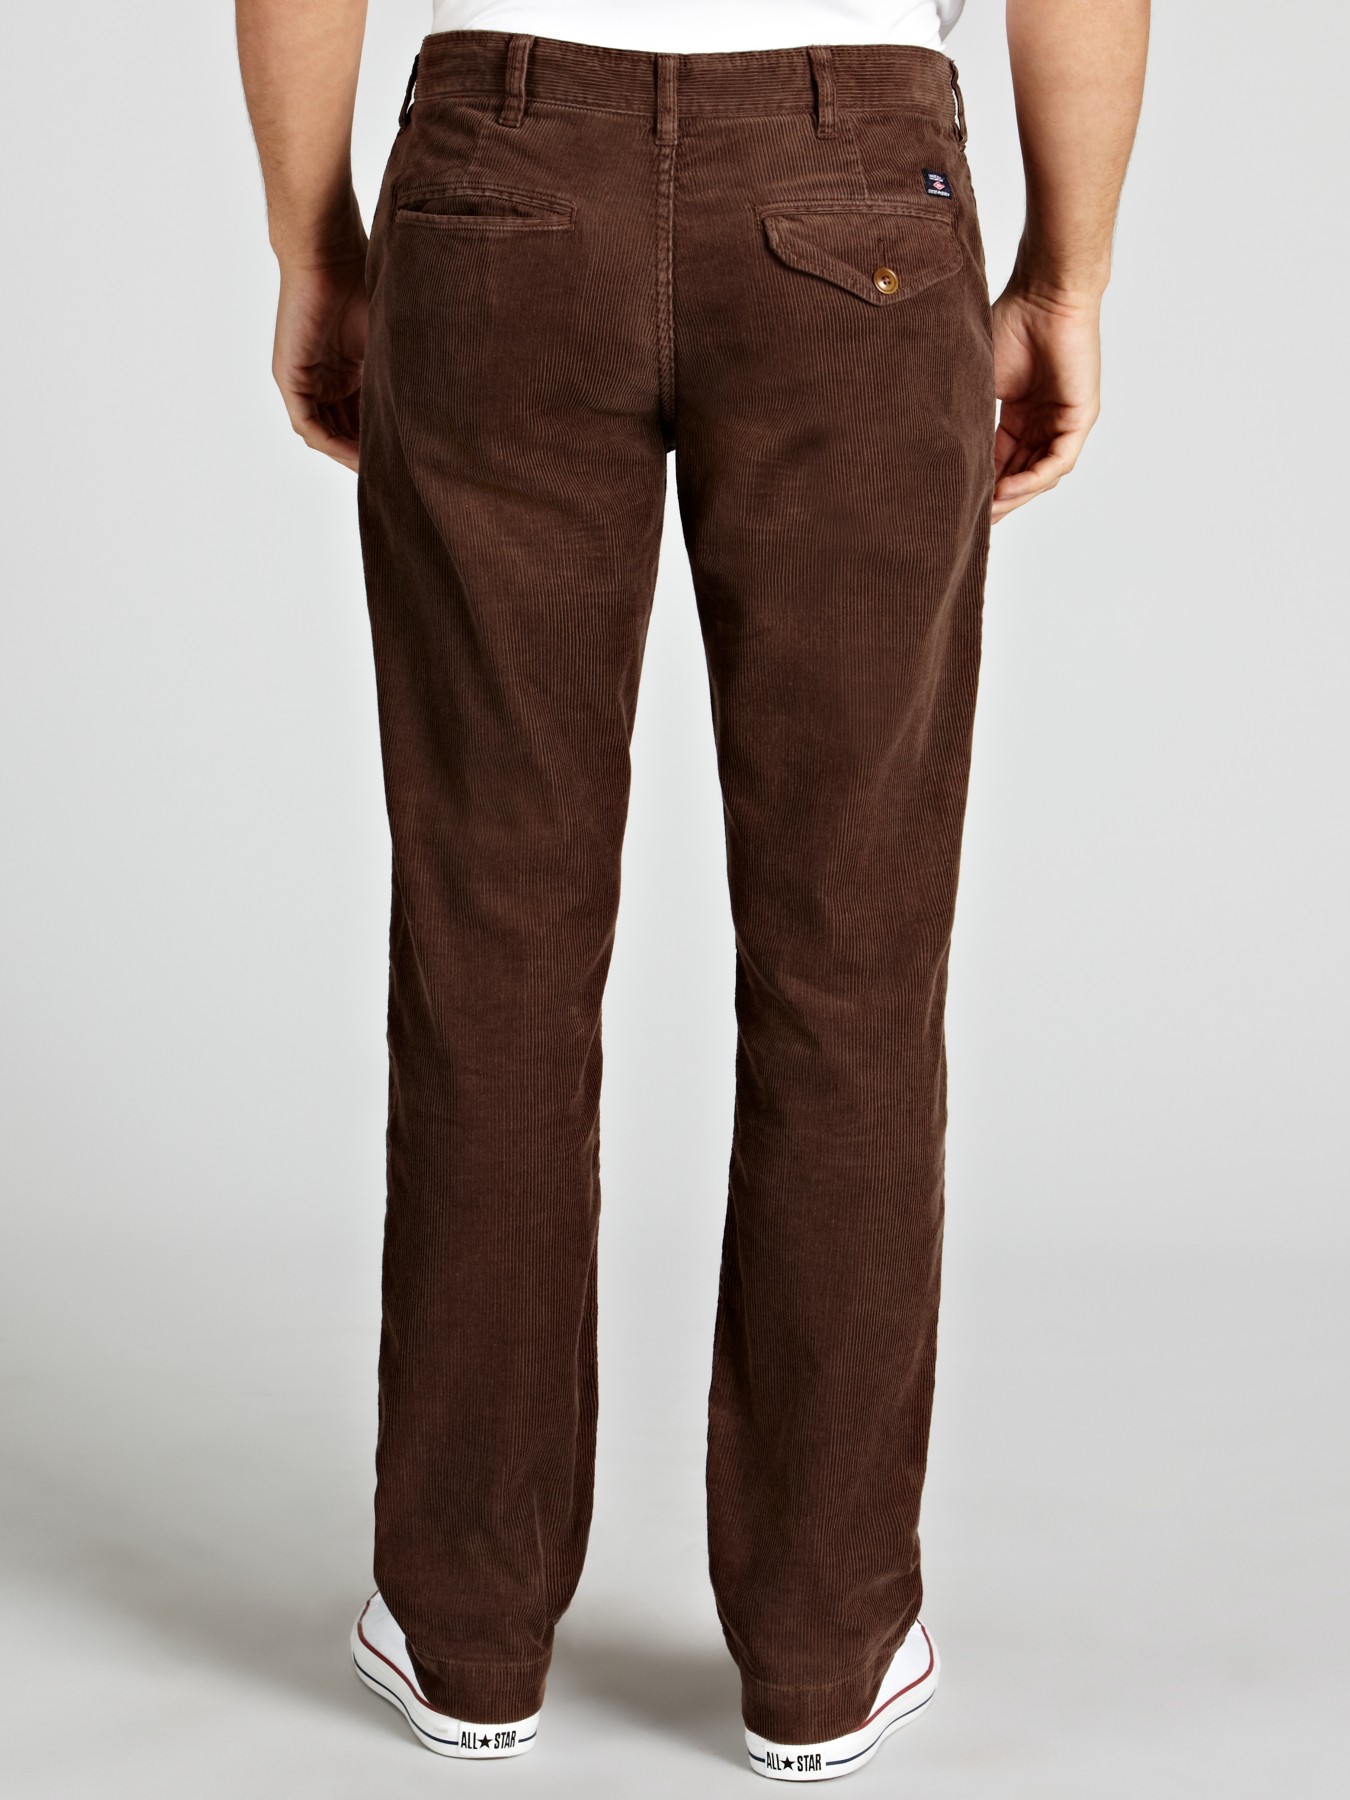 Barbour Joshua Cotton Corduroy Trousers in Olive (Brown) for Men - Lyst